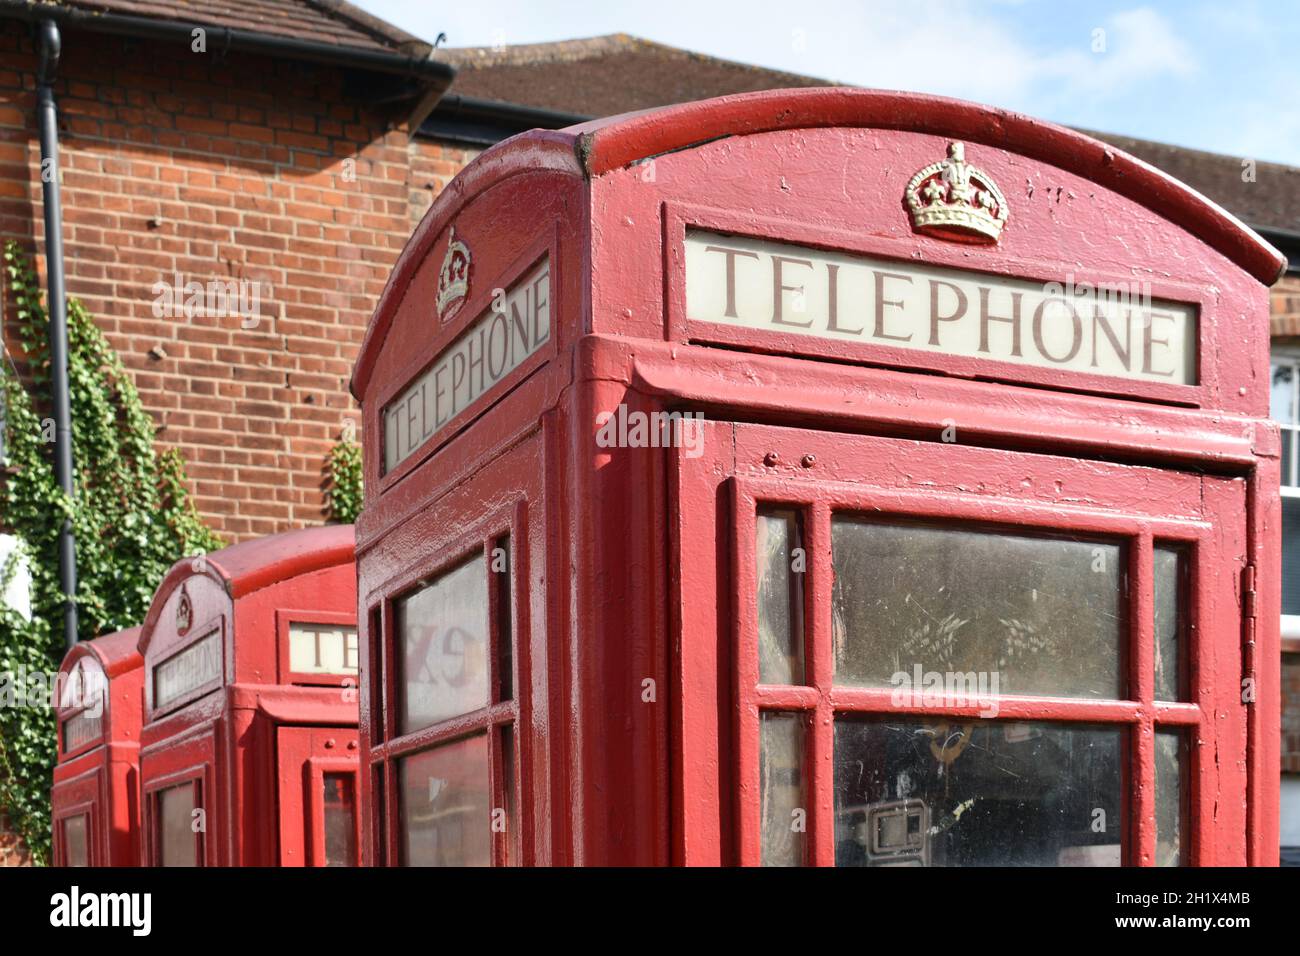 close up of 3 vintage red telephone boxes with gold royal crown on top, in a street outside a brick building in summer Stock Photo